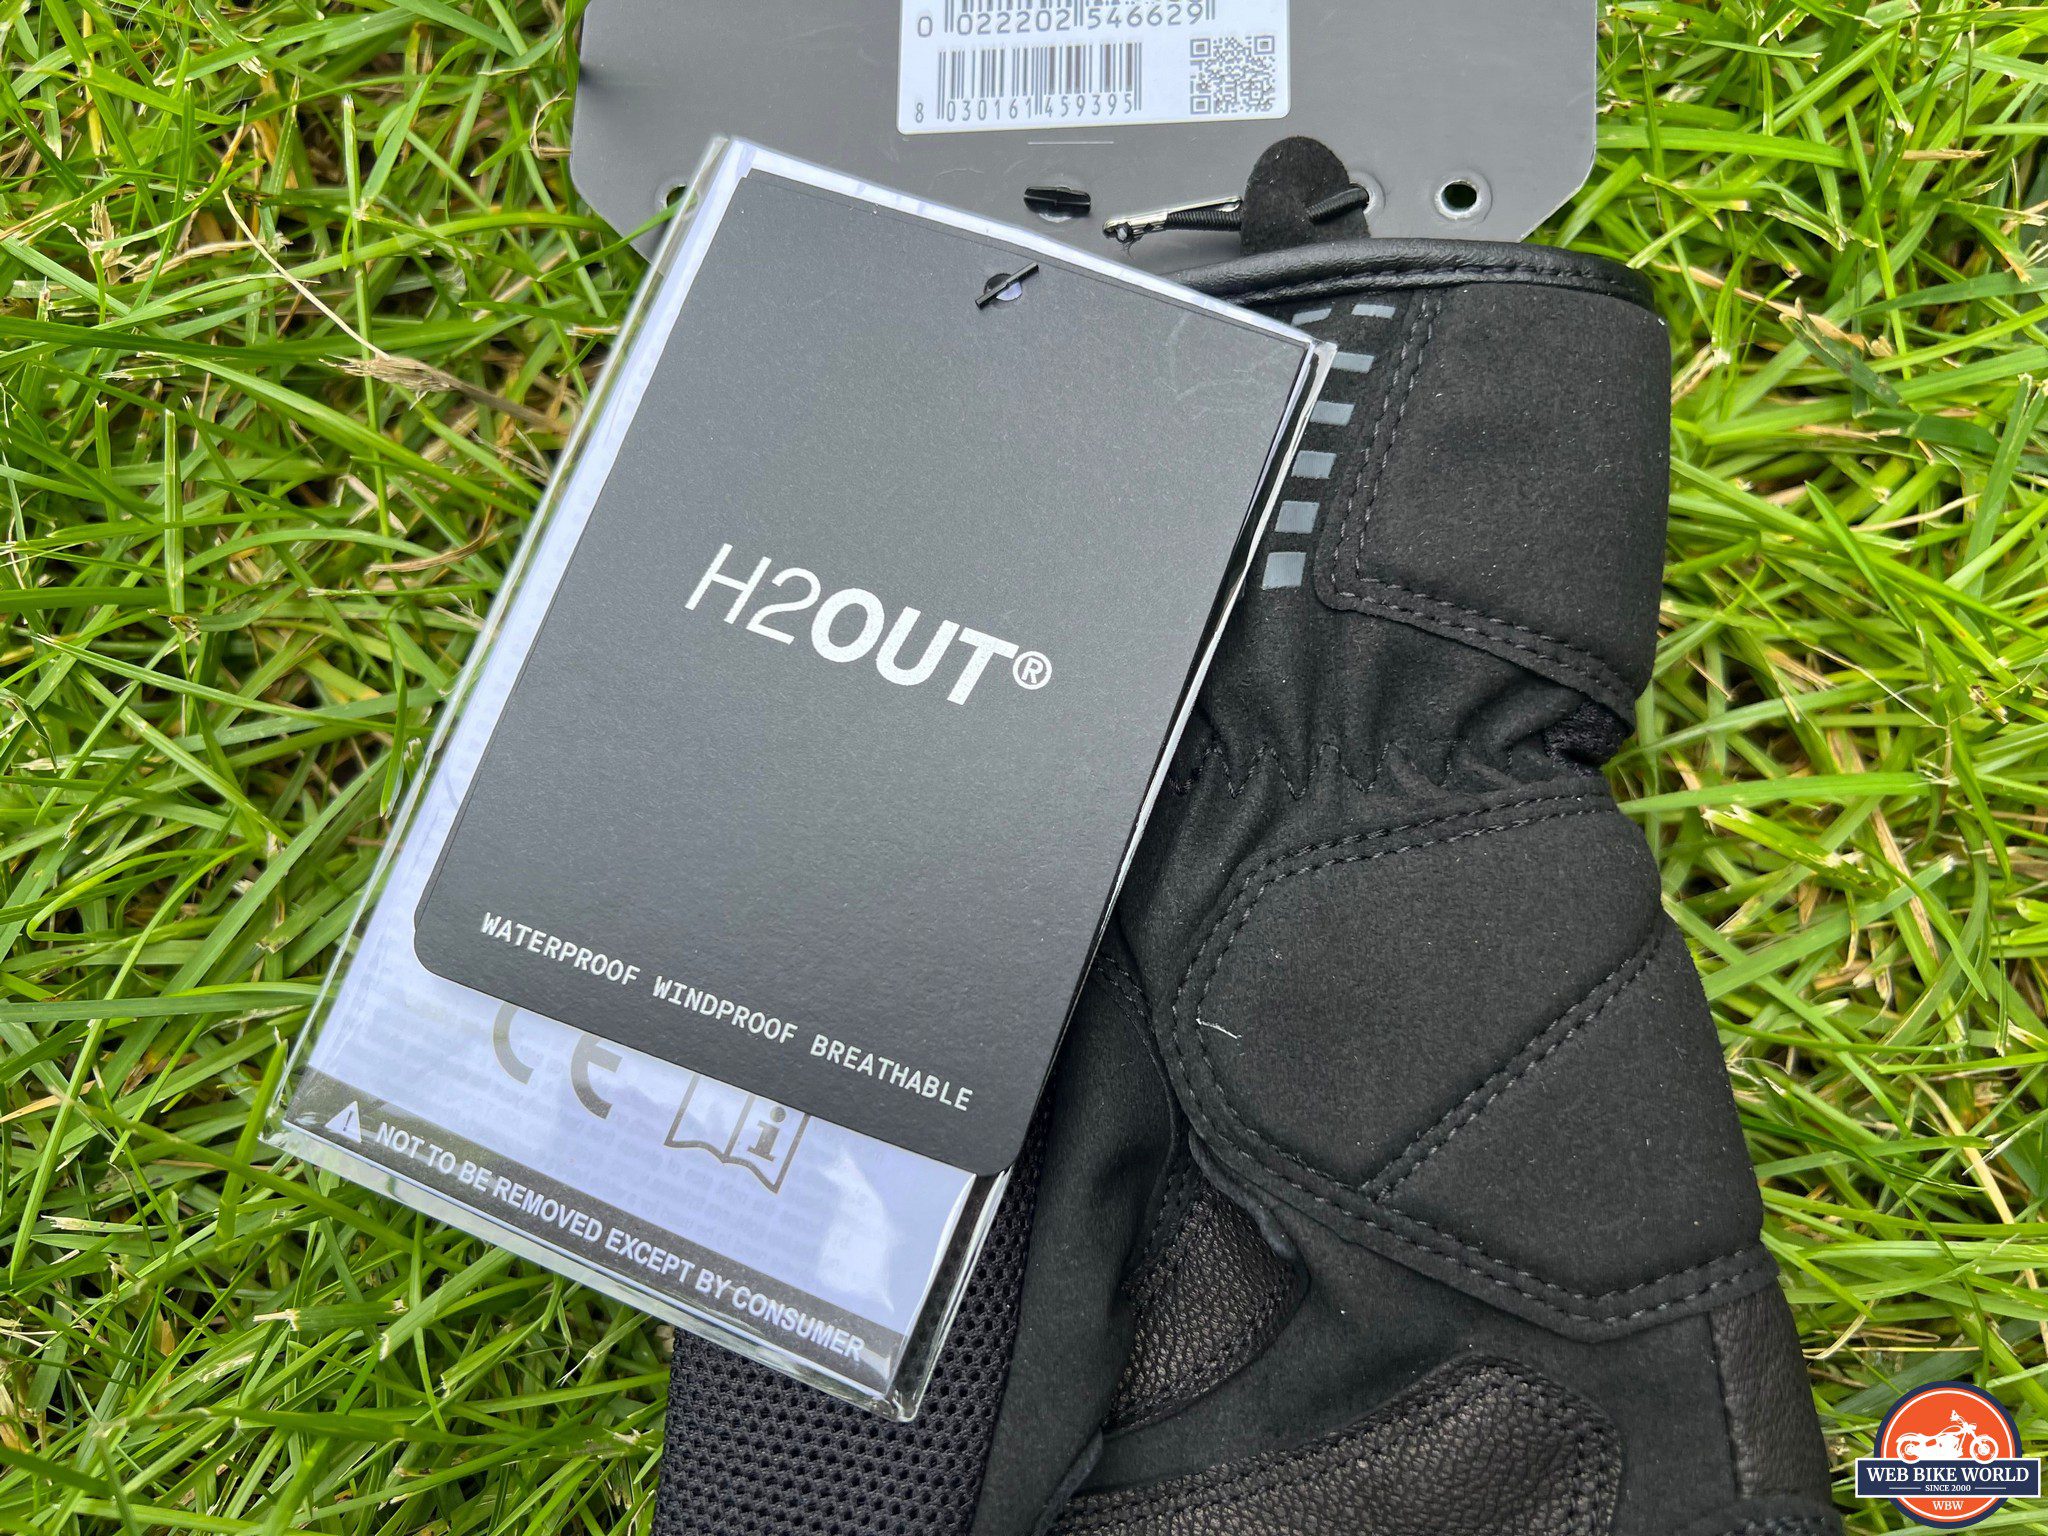 H2Out tag on Spidi gloves